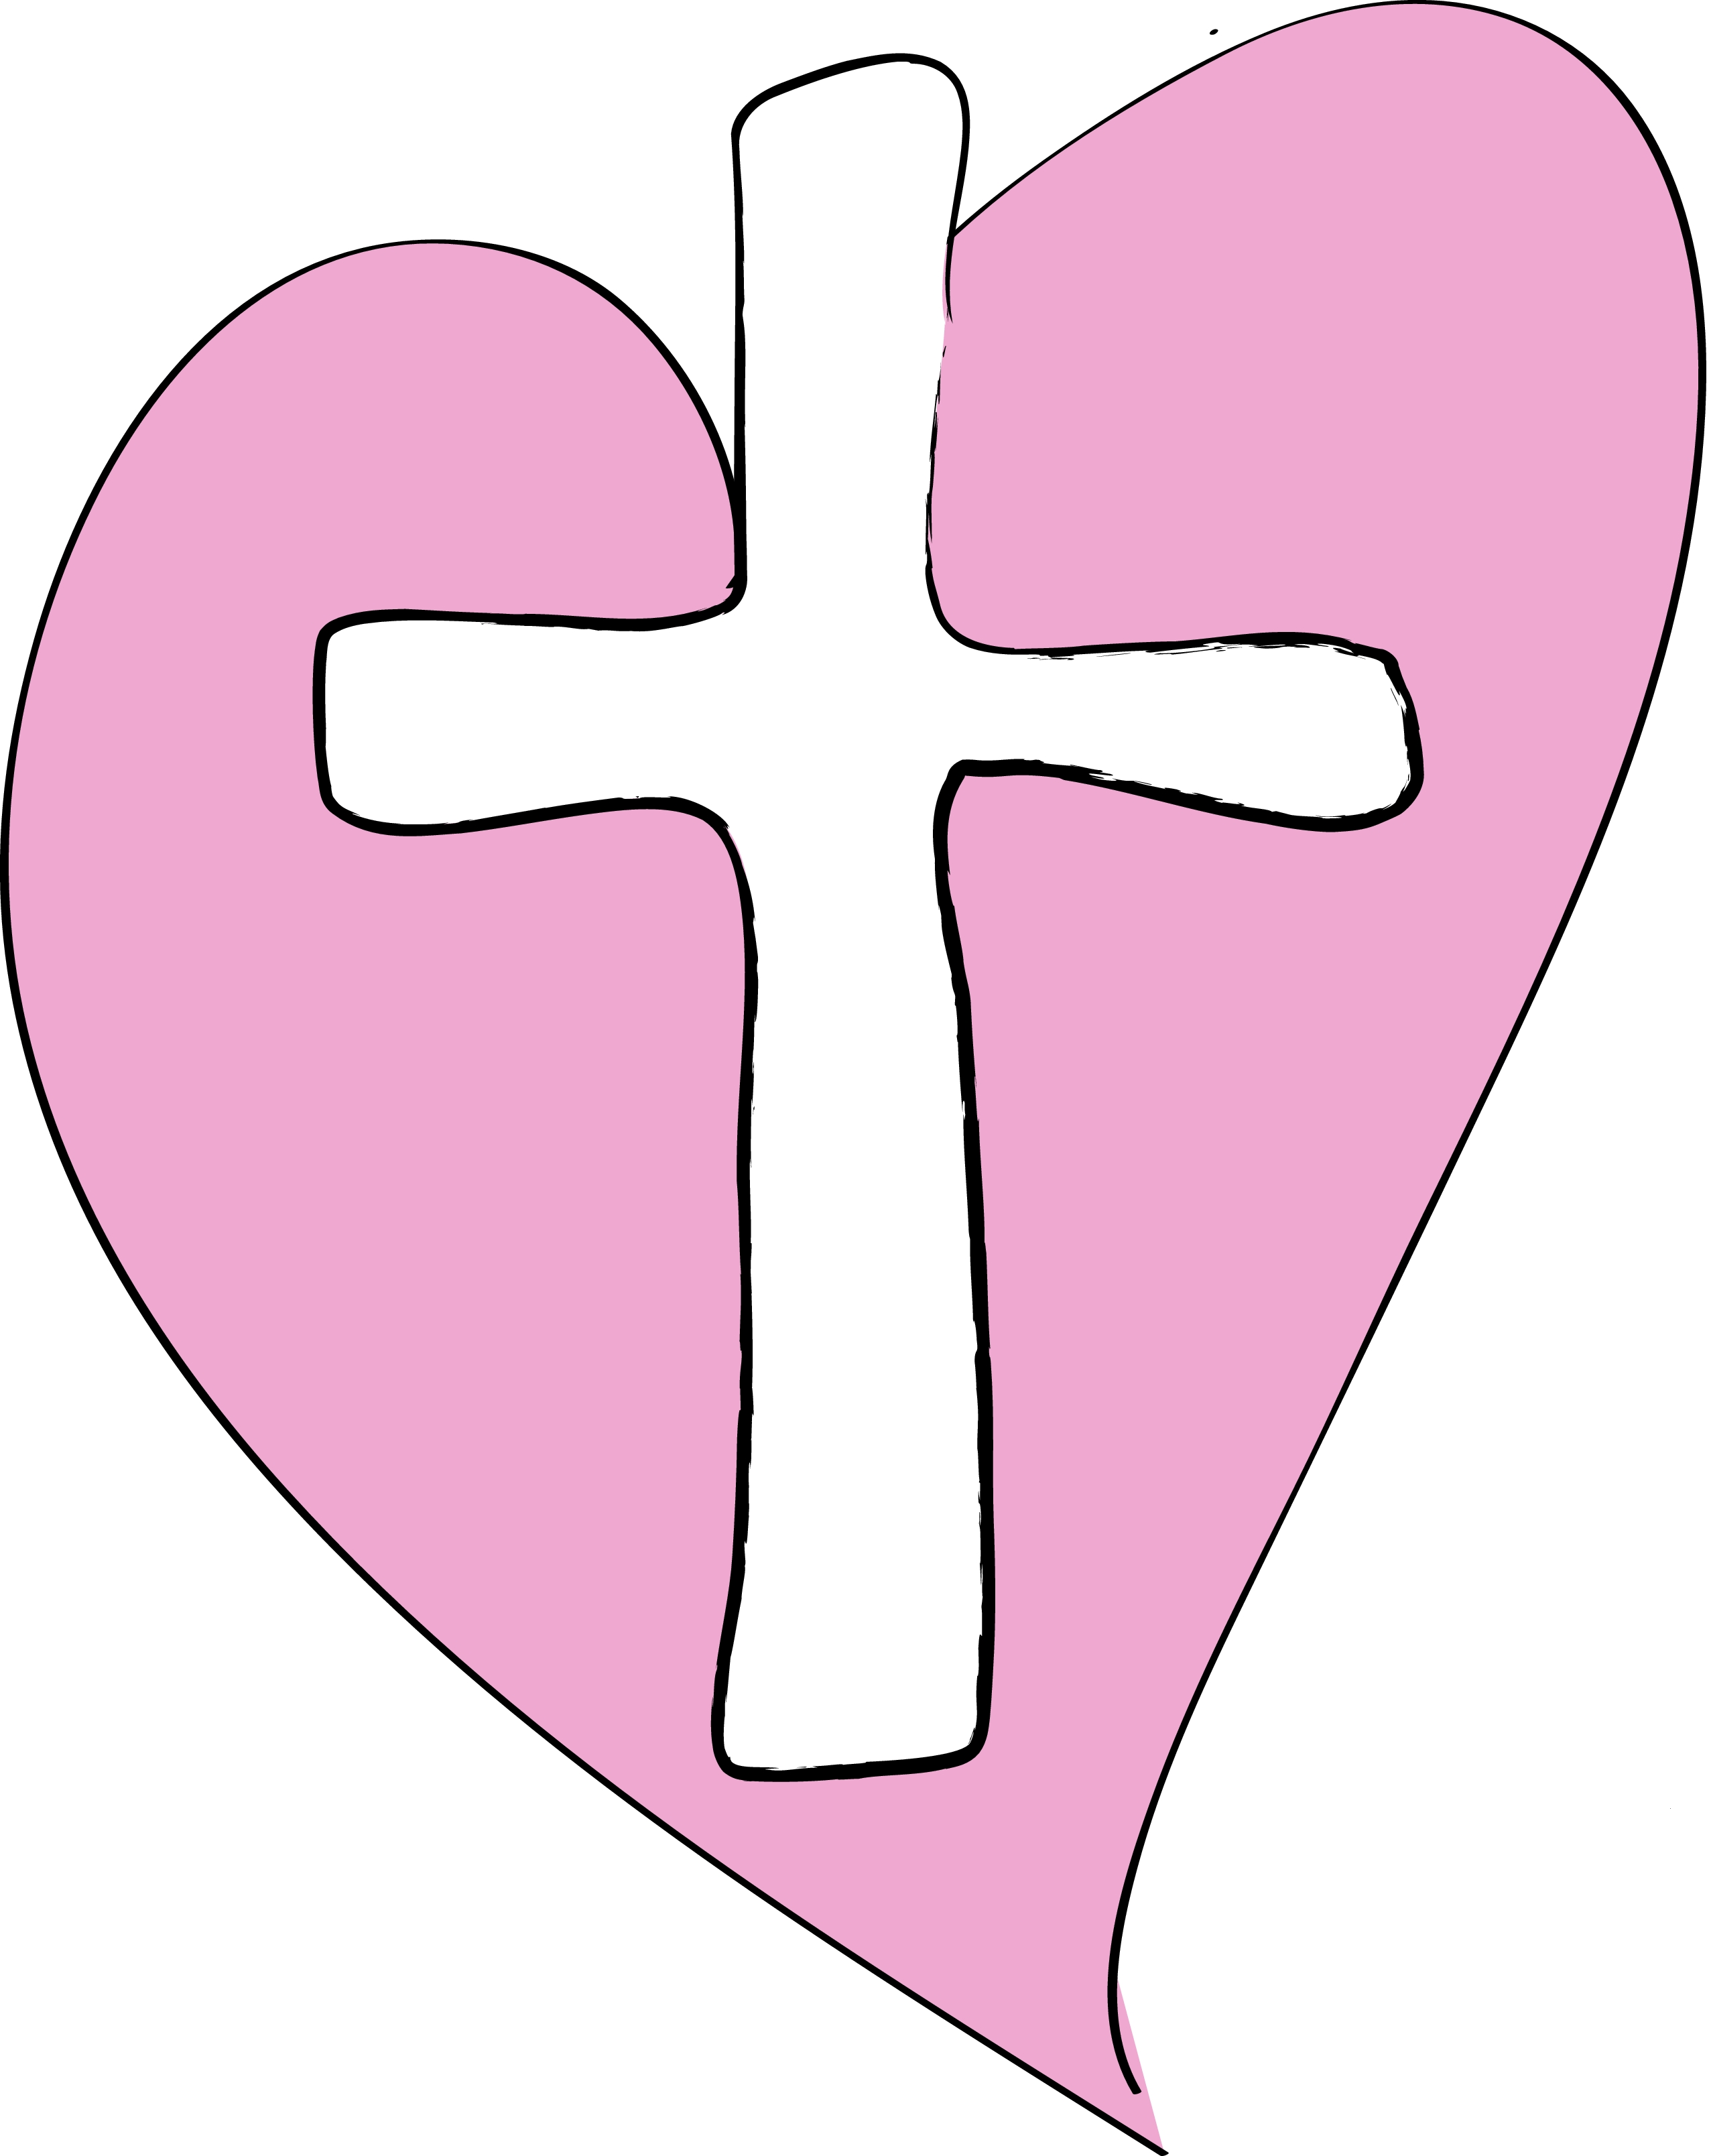 free cross and heart clipart - photo #6